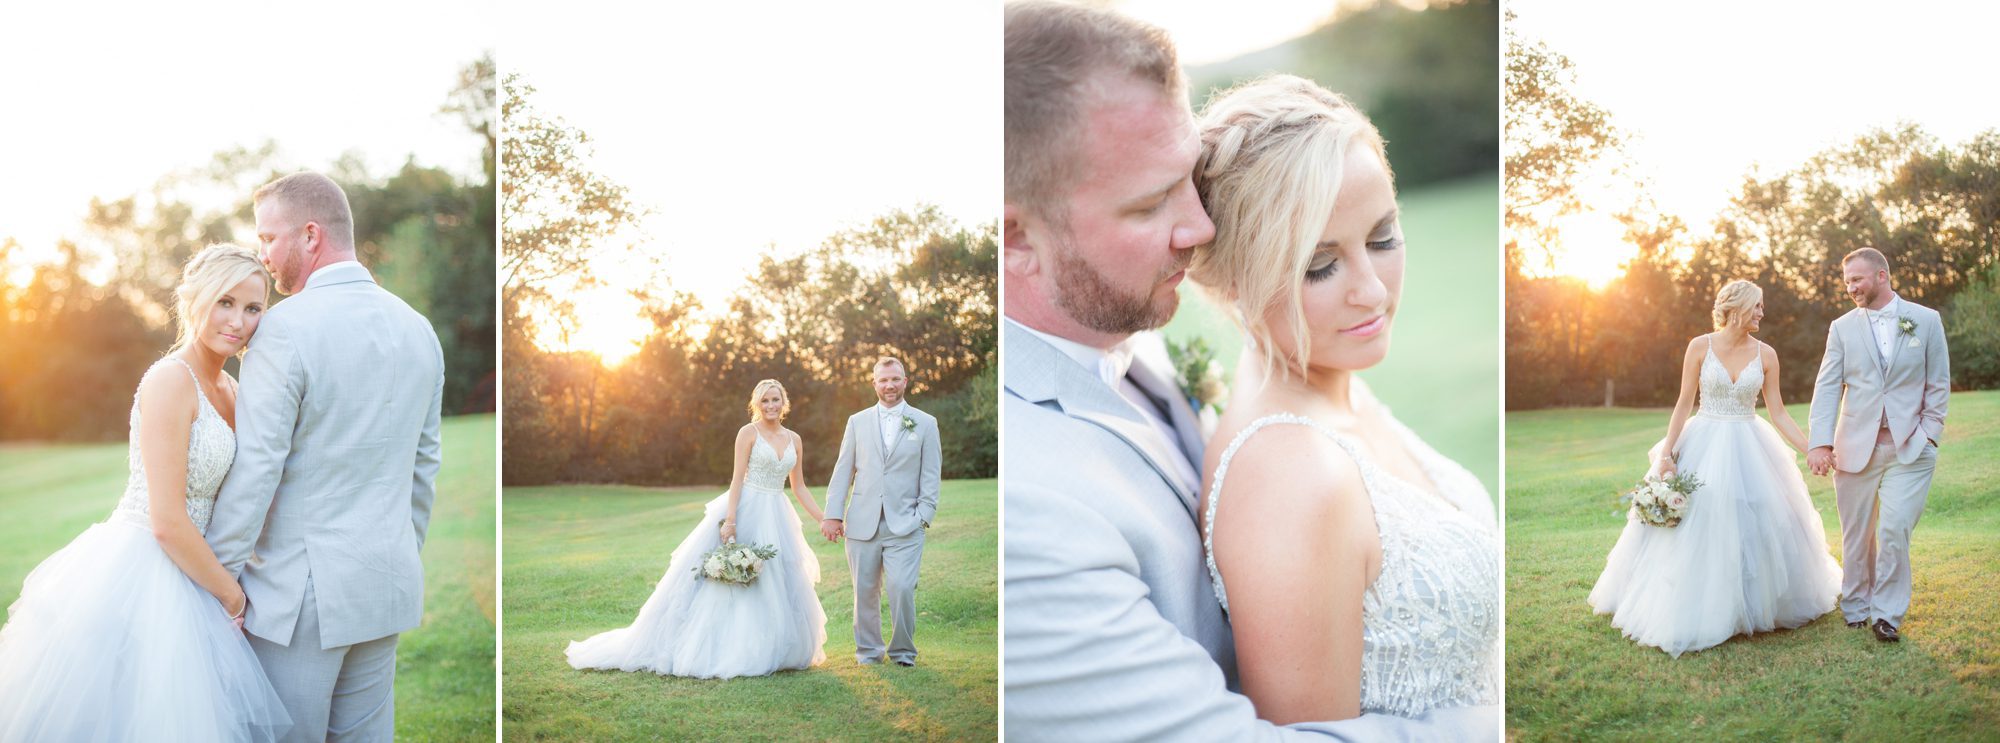 Photos of bride and groom at sunset after wedding ceremony. Wedding photography at Cedarwood Weddings and Estate in Nashville, TN photography by Krista Lee Photography